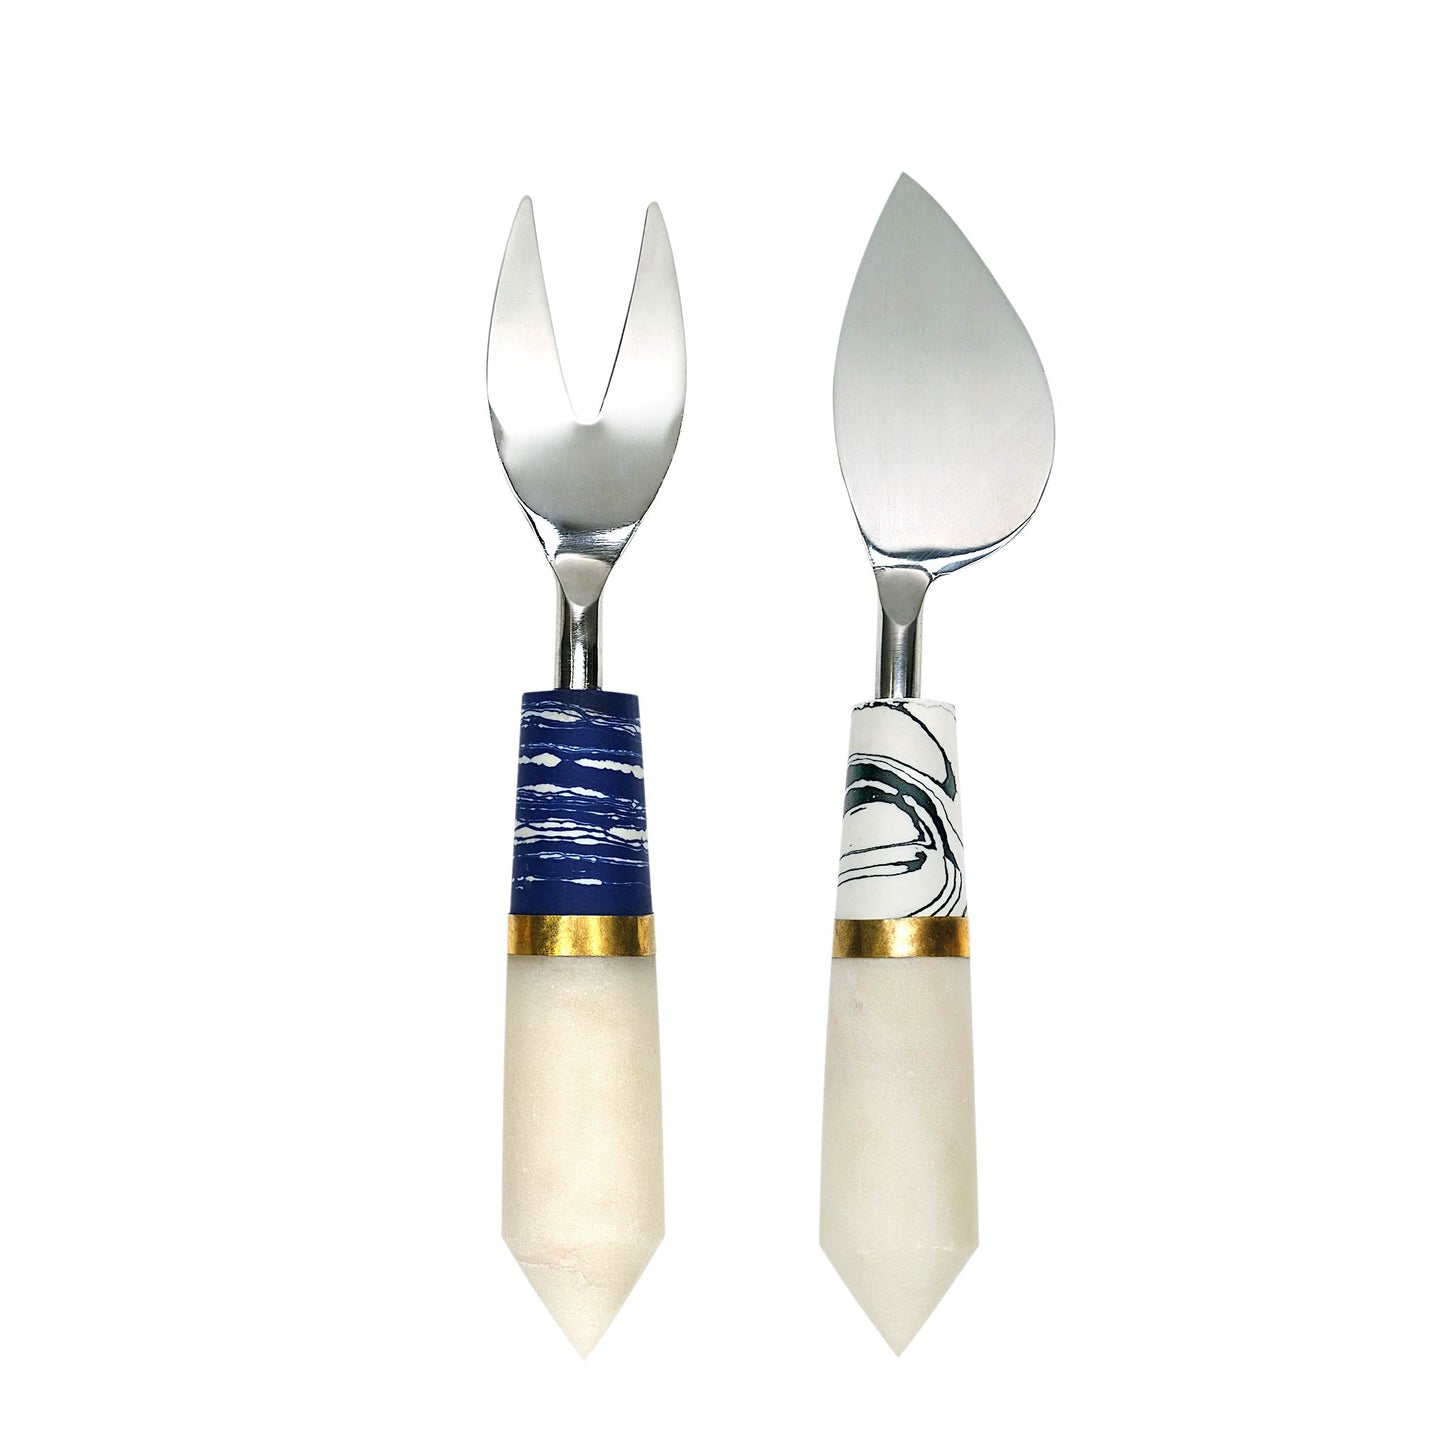 2 Piece Cheese Knife Set, Stainless Steel & Marble